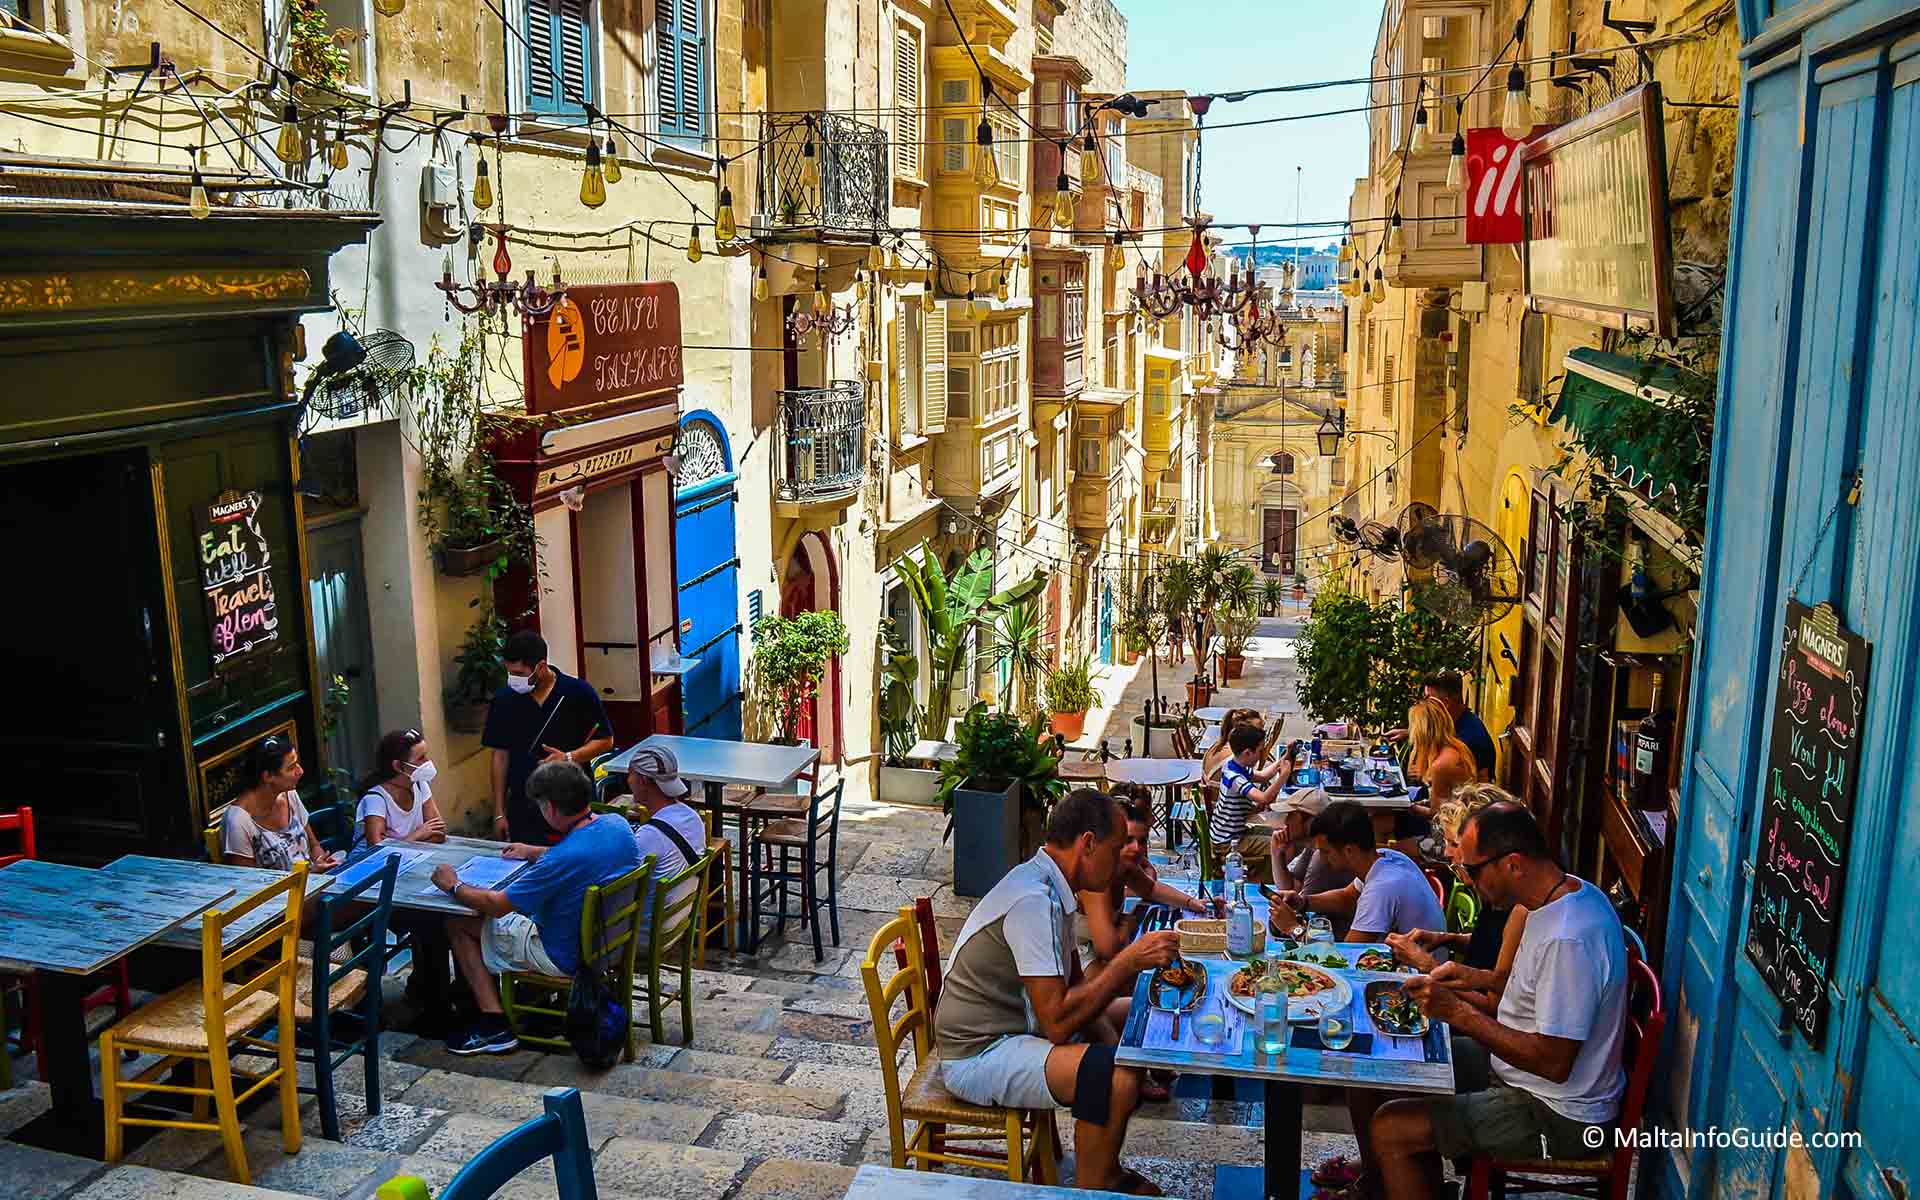 People eating at a restaurant in St. Lucy street Valletta.